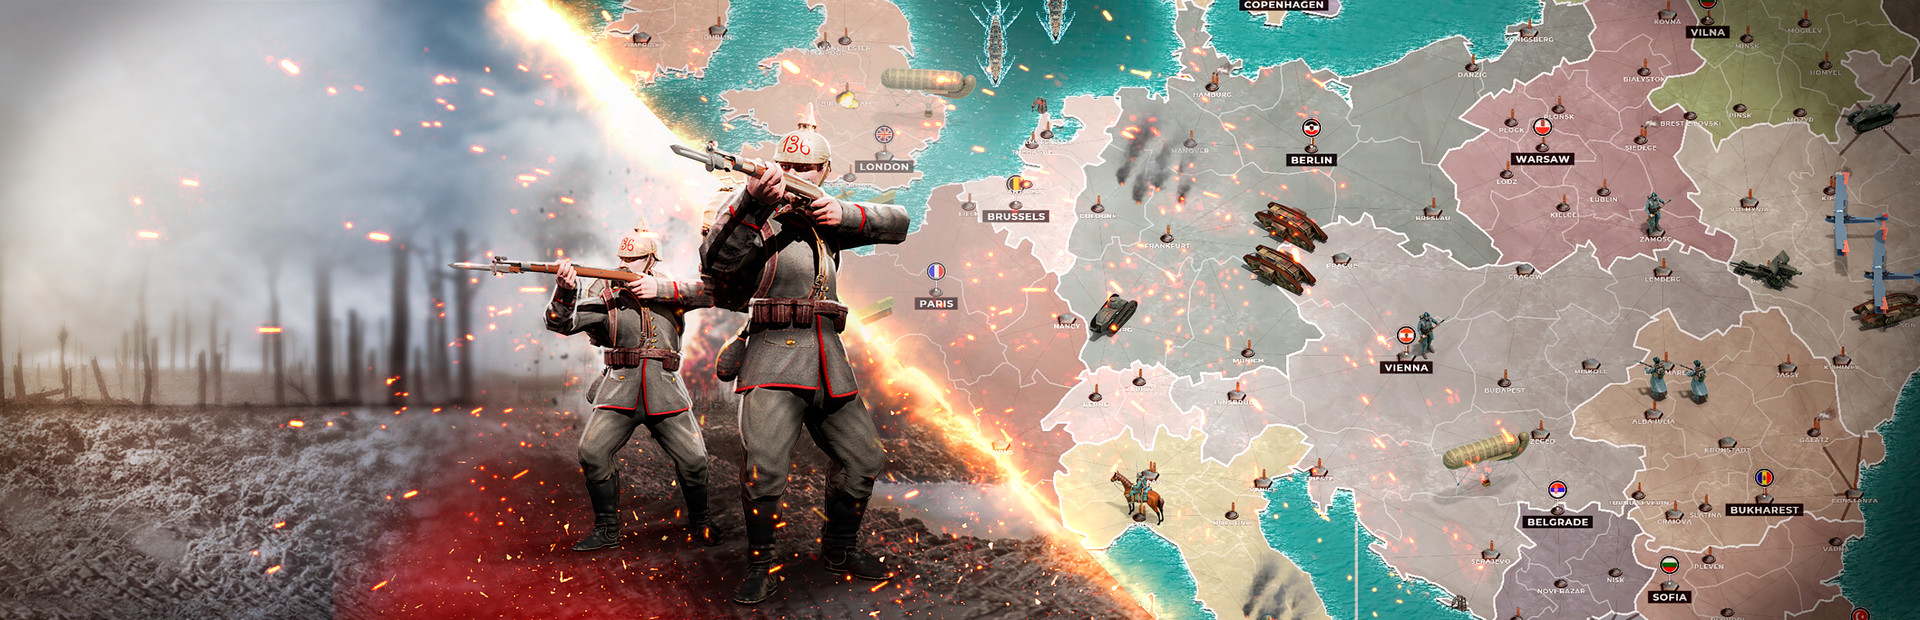 Supremacy 1914: World War 1 cover image